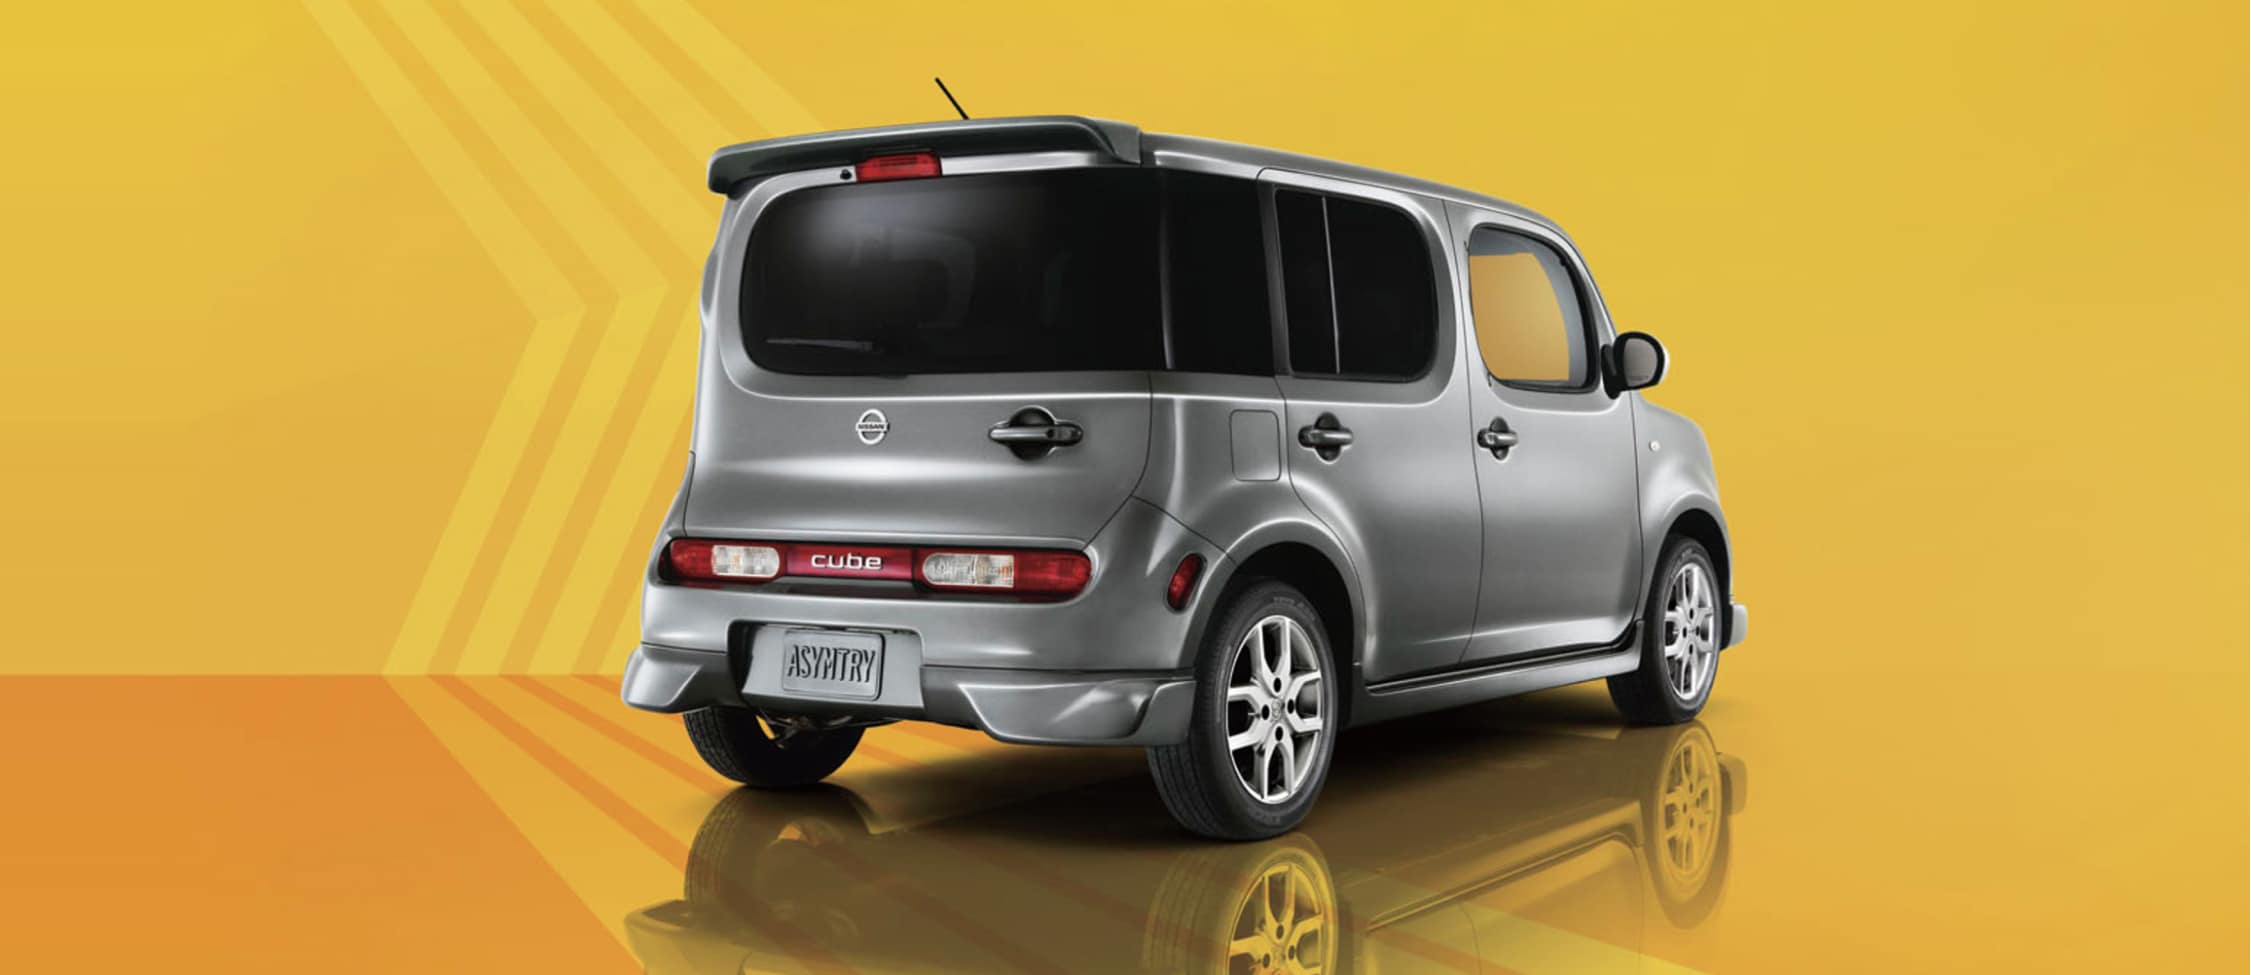 Rear view of Nissan Cube on yellow background